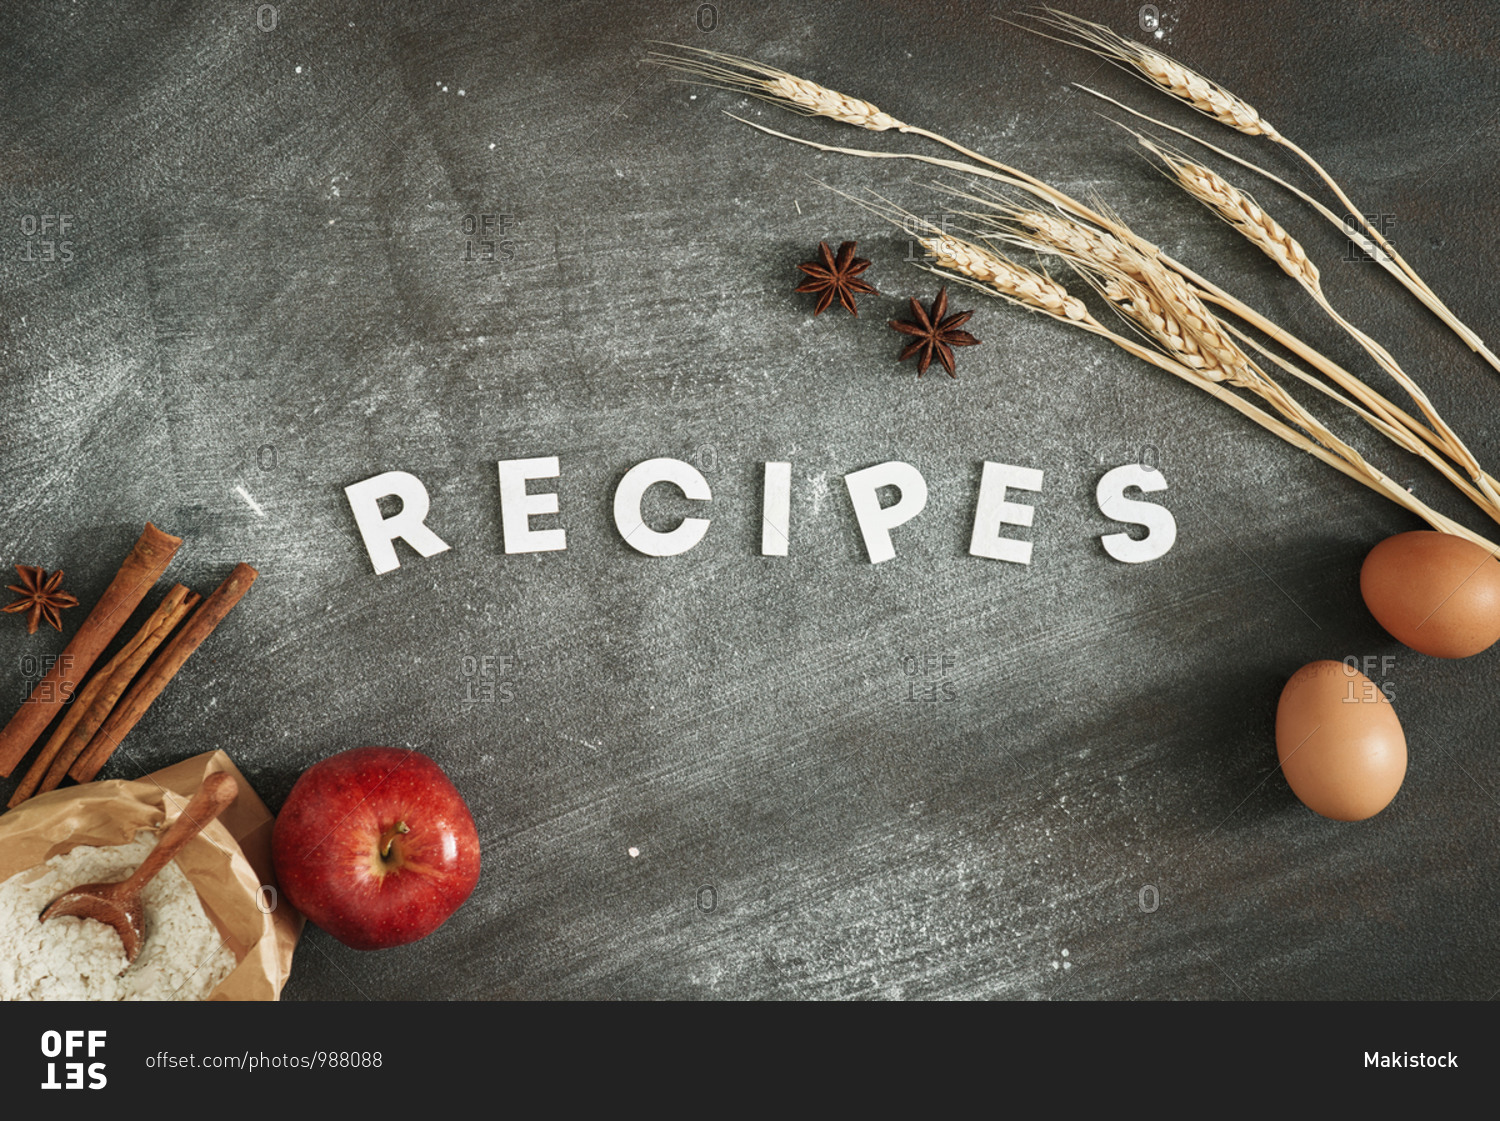 Recipes poster design with cake ingredients on black chalkboard from above.